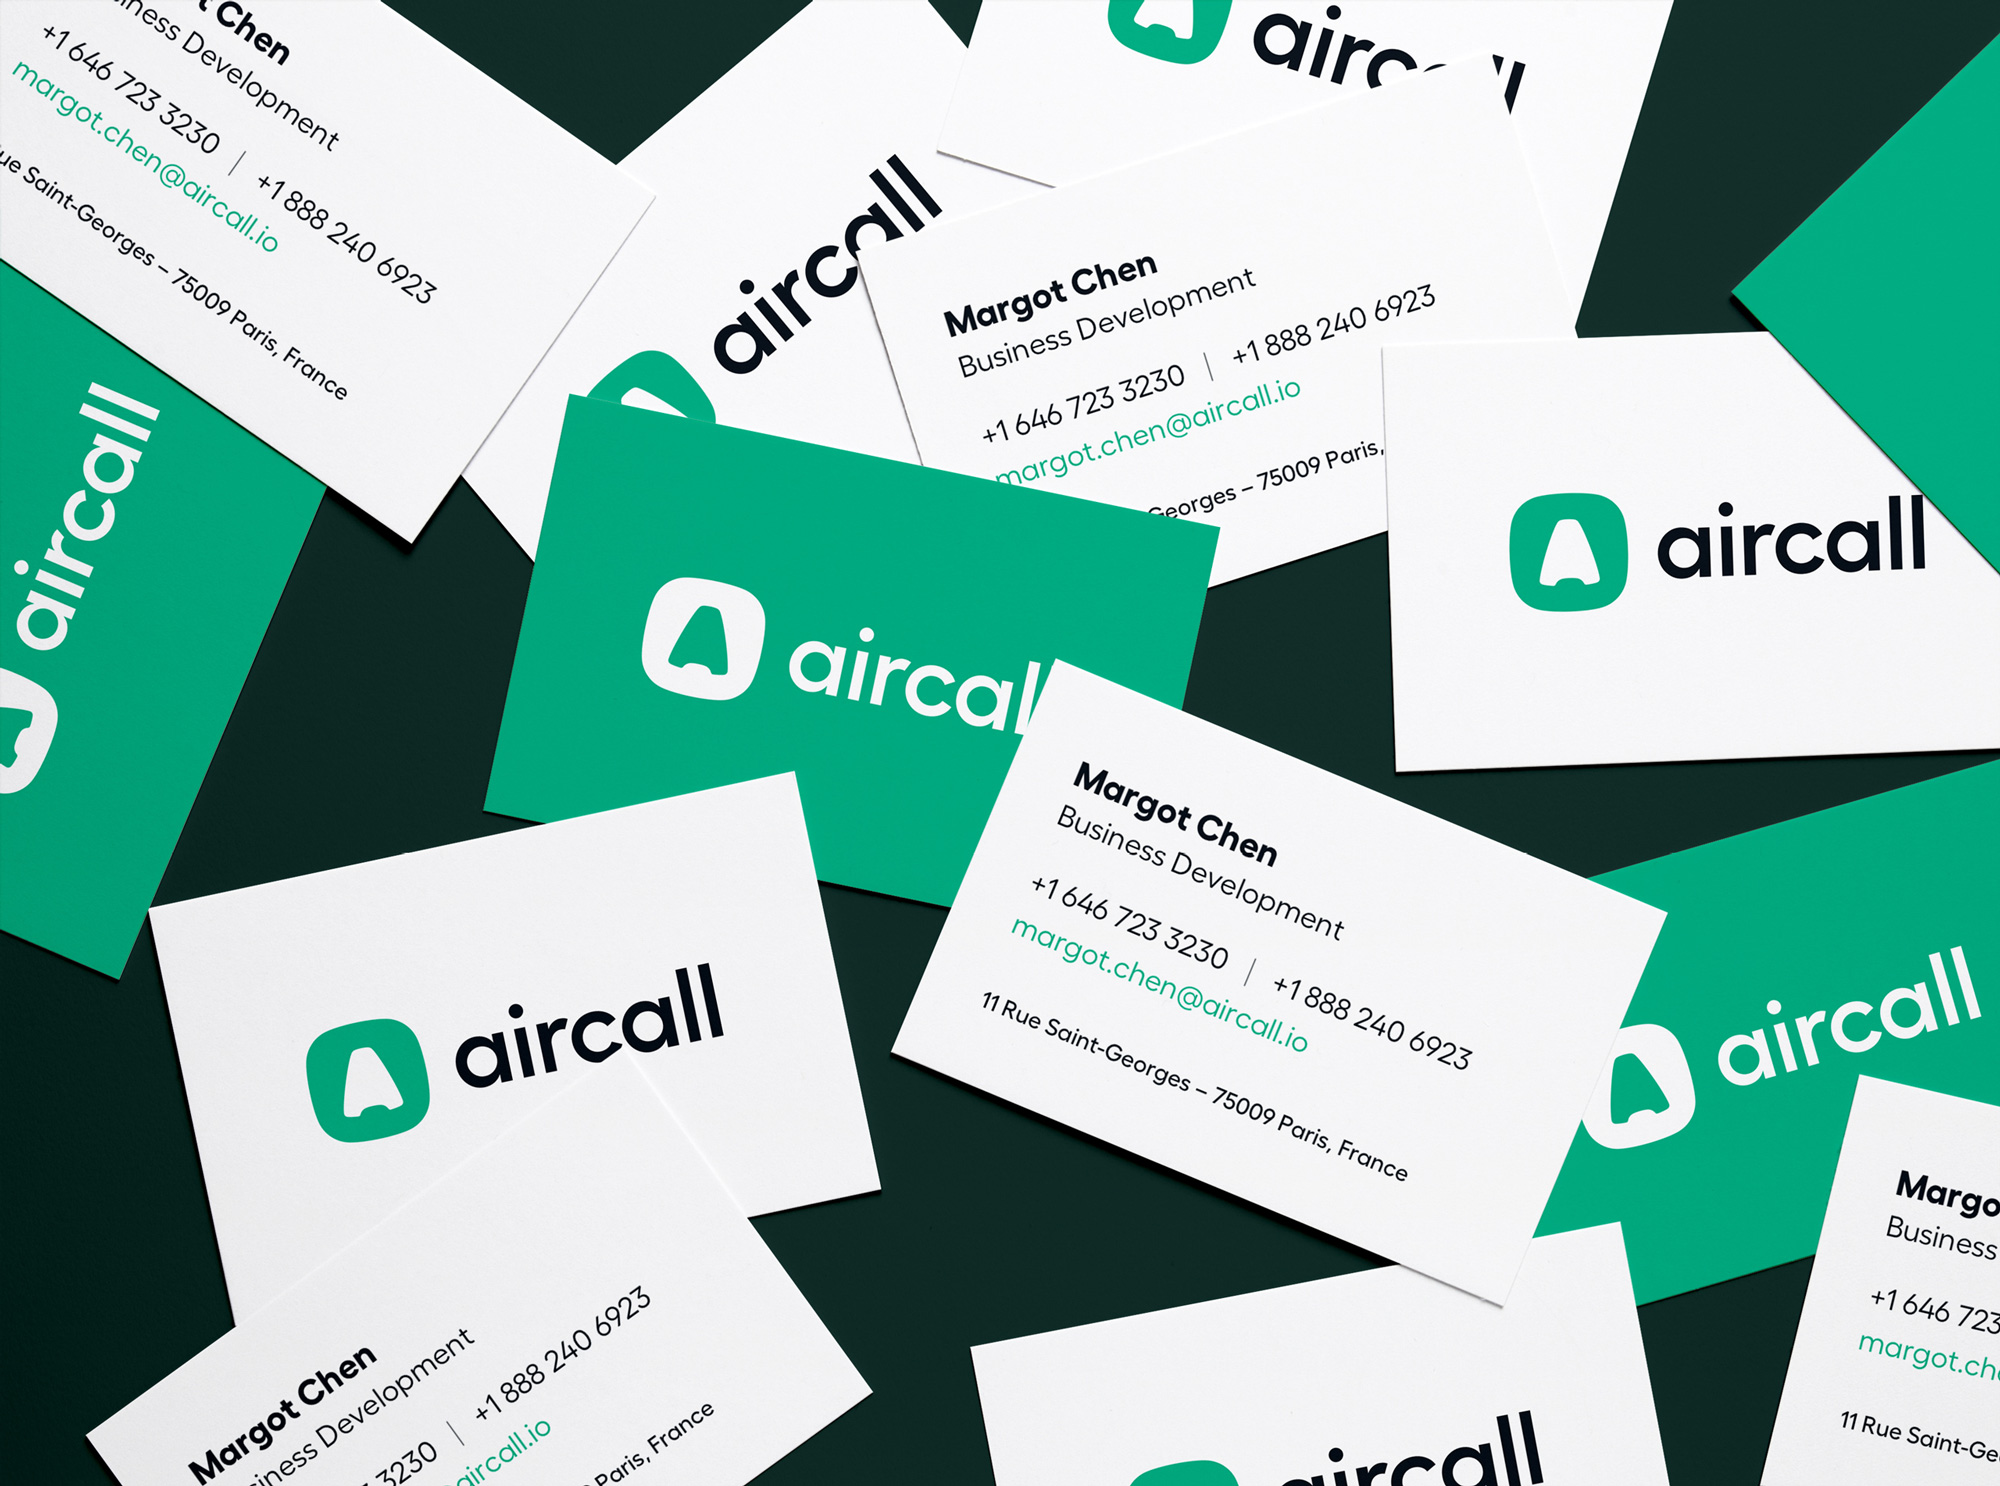 New Logo and Identity for Aircall by Muxu.Muxu and In-house